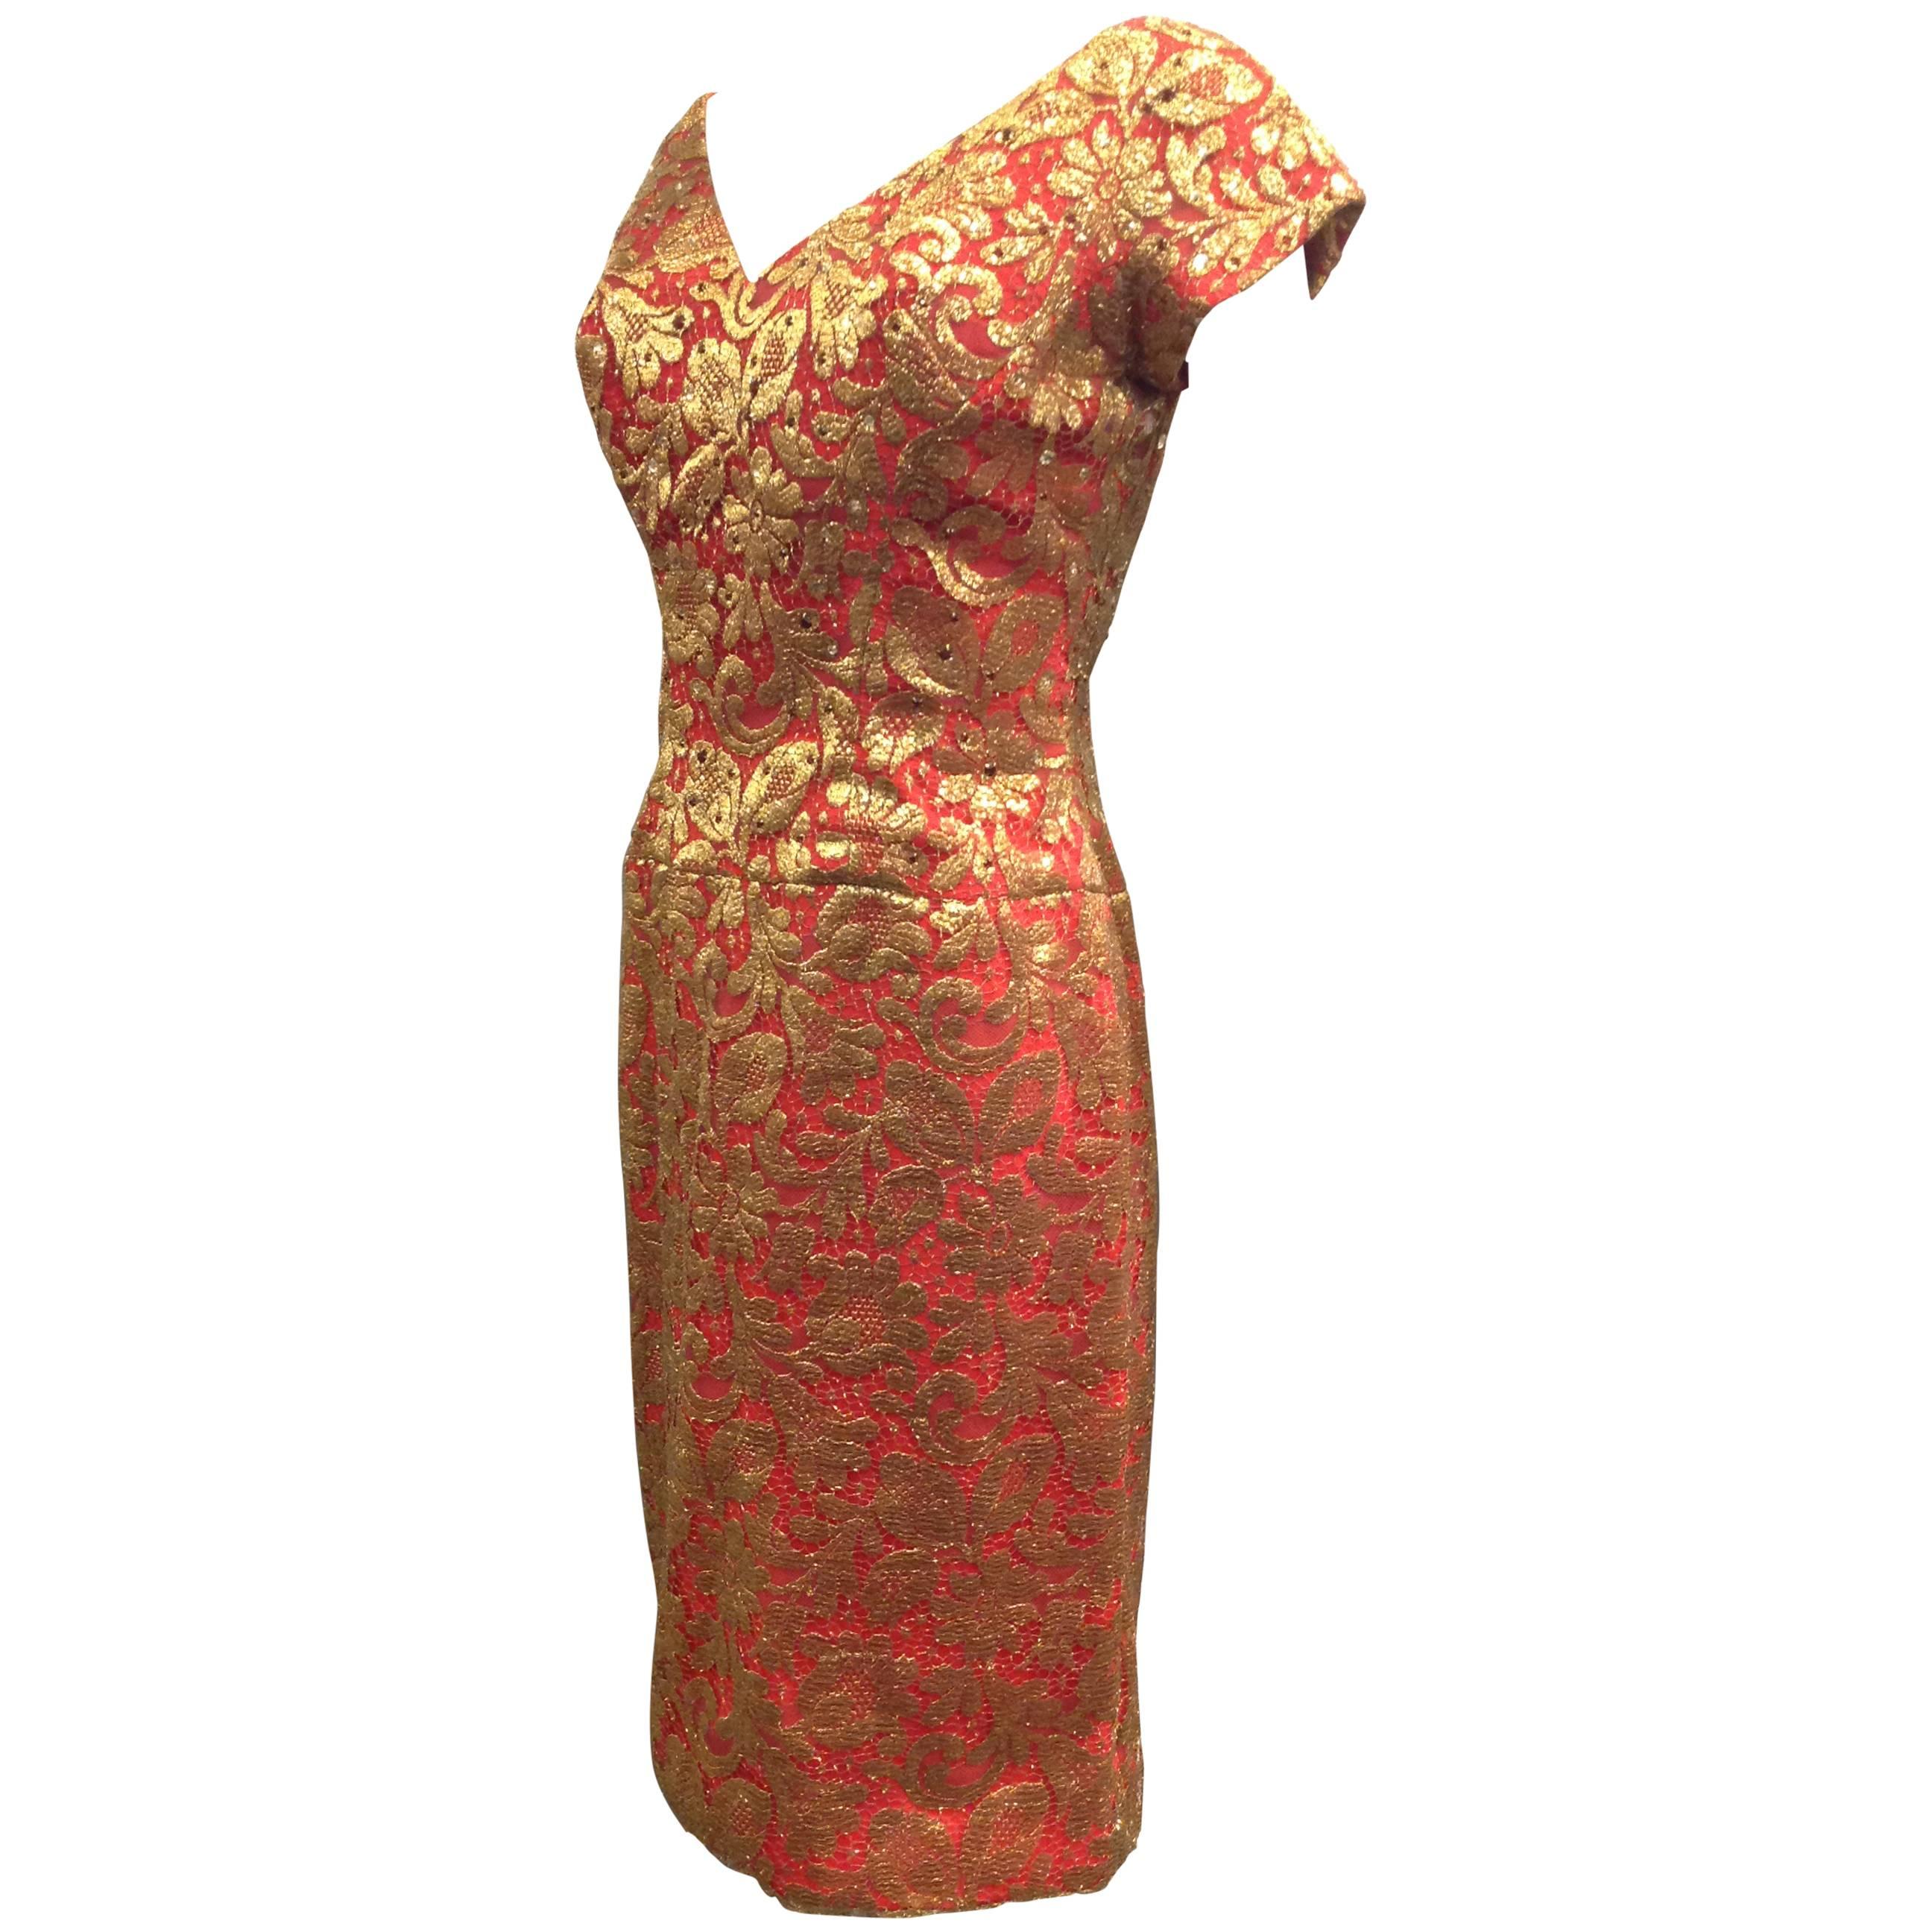 1950s Red Sheath Dress with Beautiful Gold Lame Lace Overlay and Crimson Stones